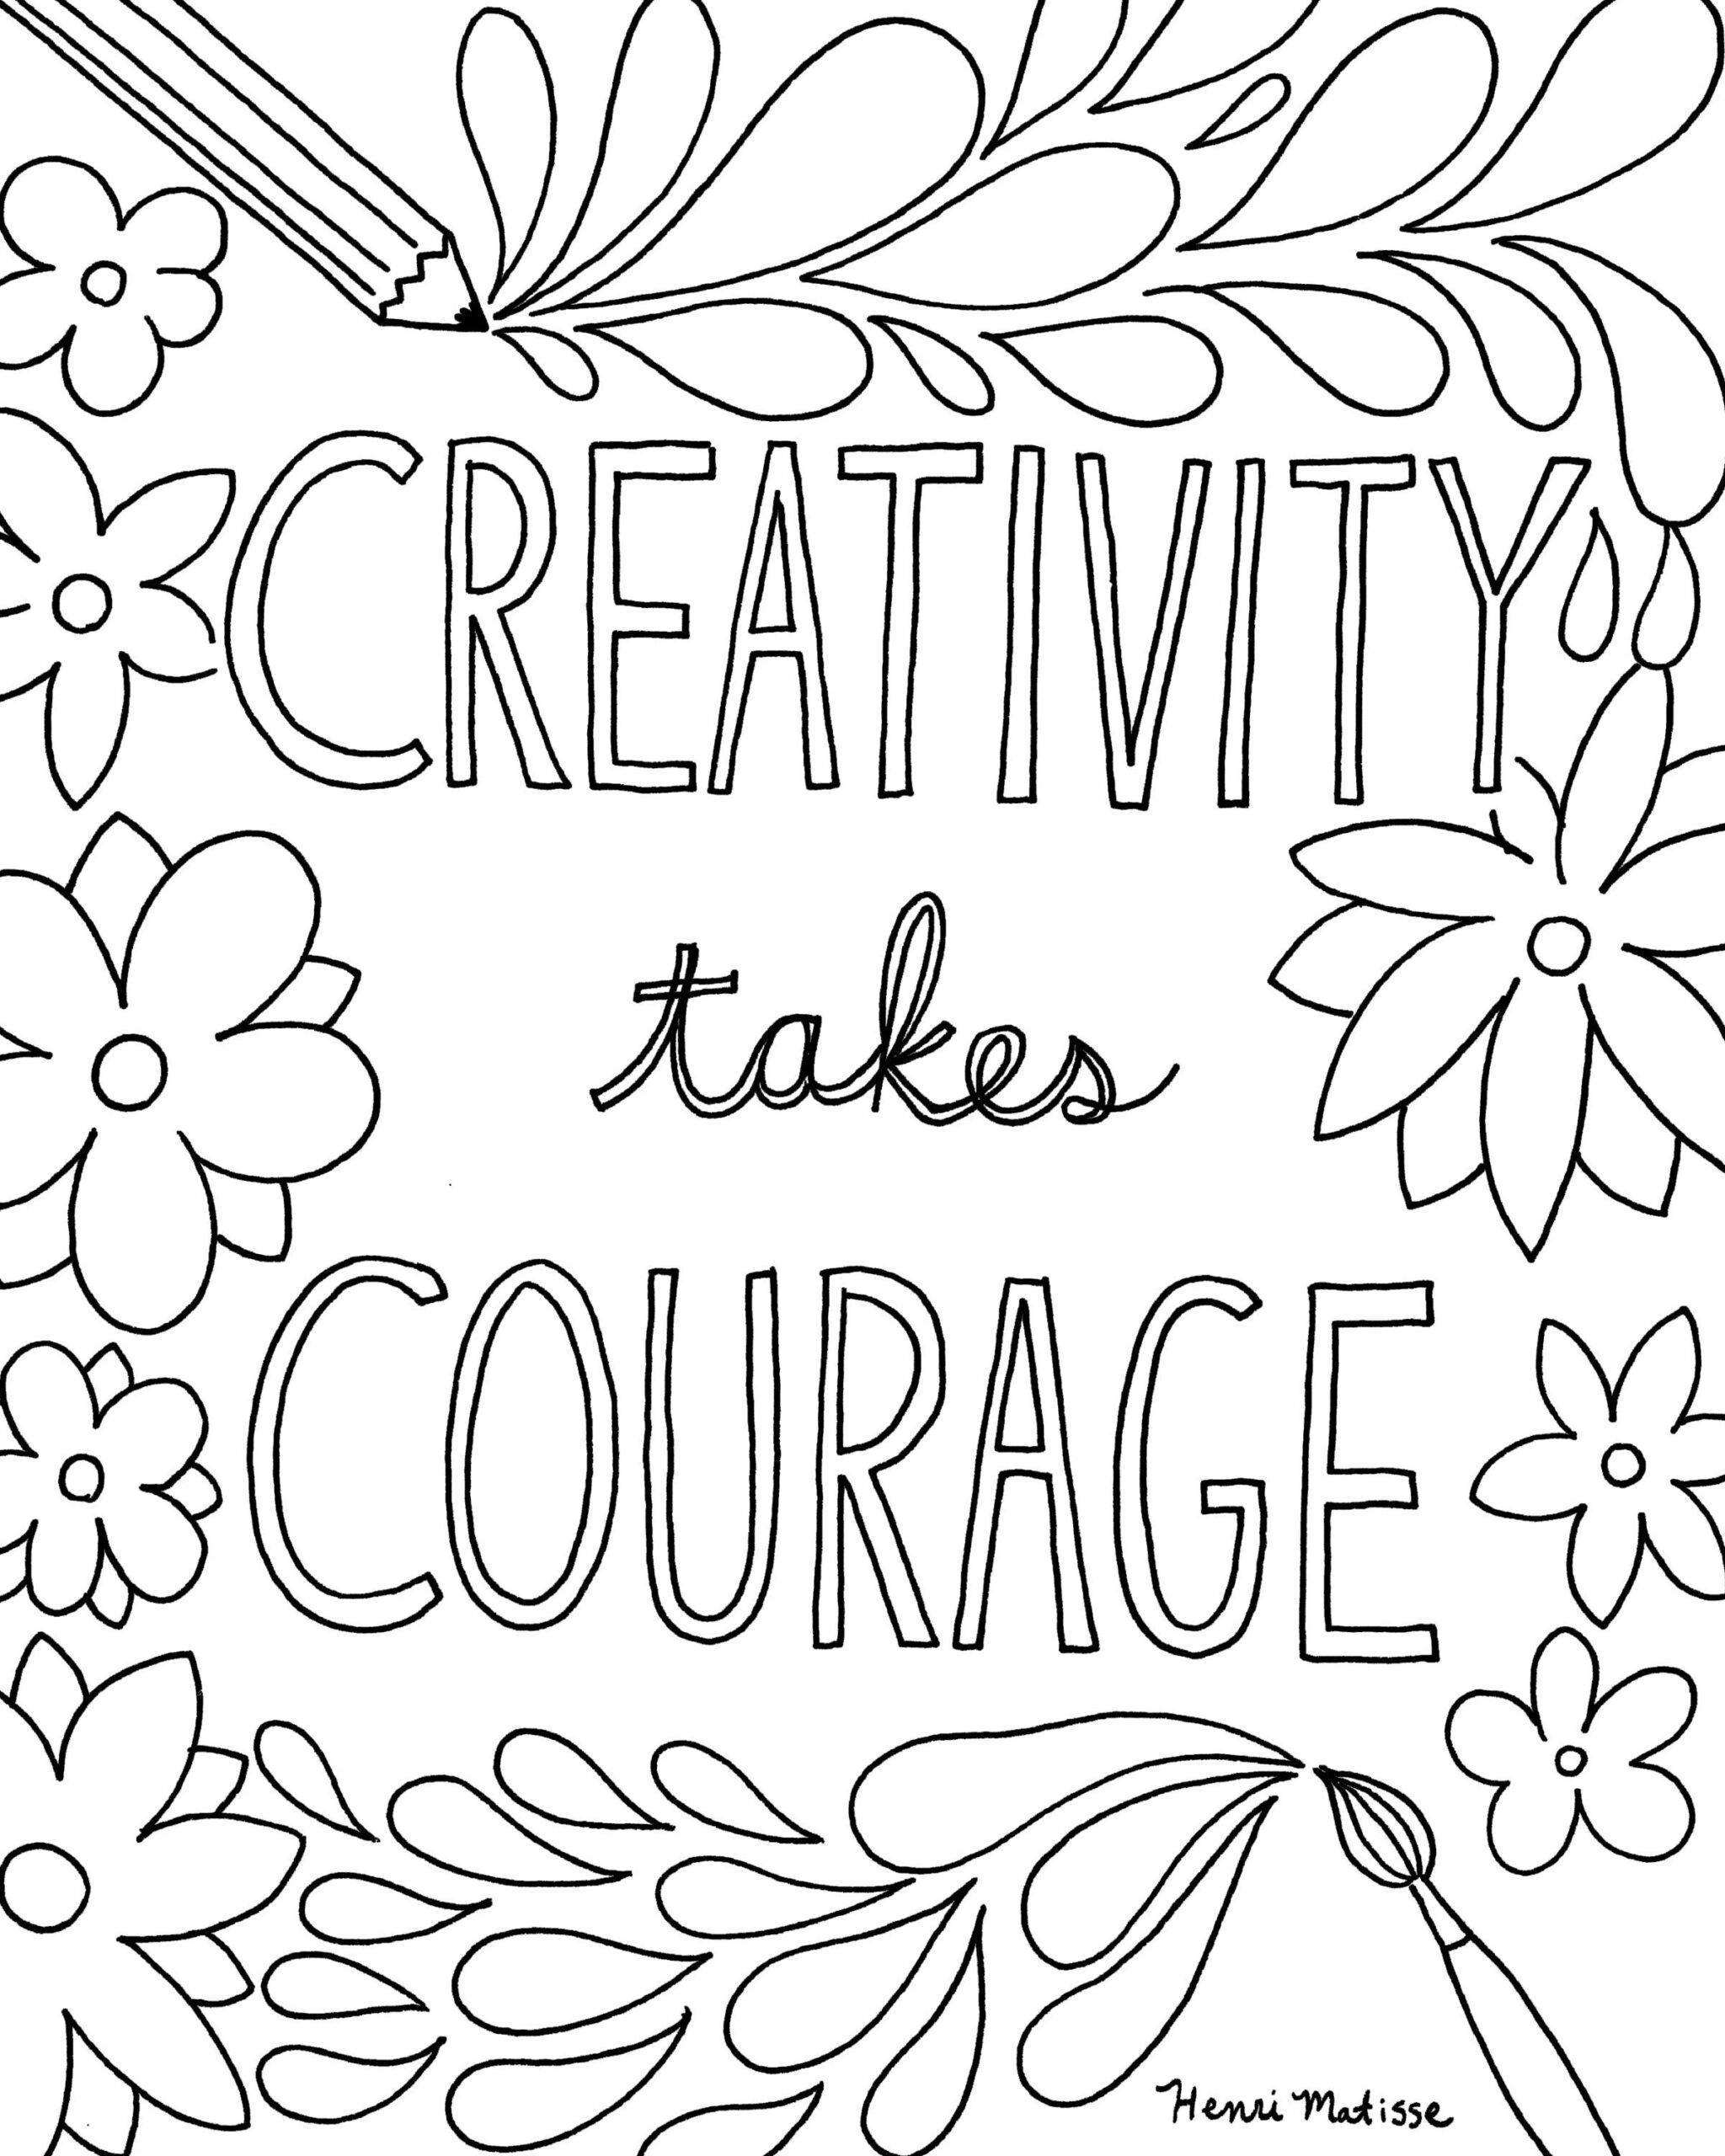 Craftsy | Express Your Creativity! | Quote Coloring Pages for Free Printable Quotes Coloring Pages